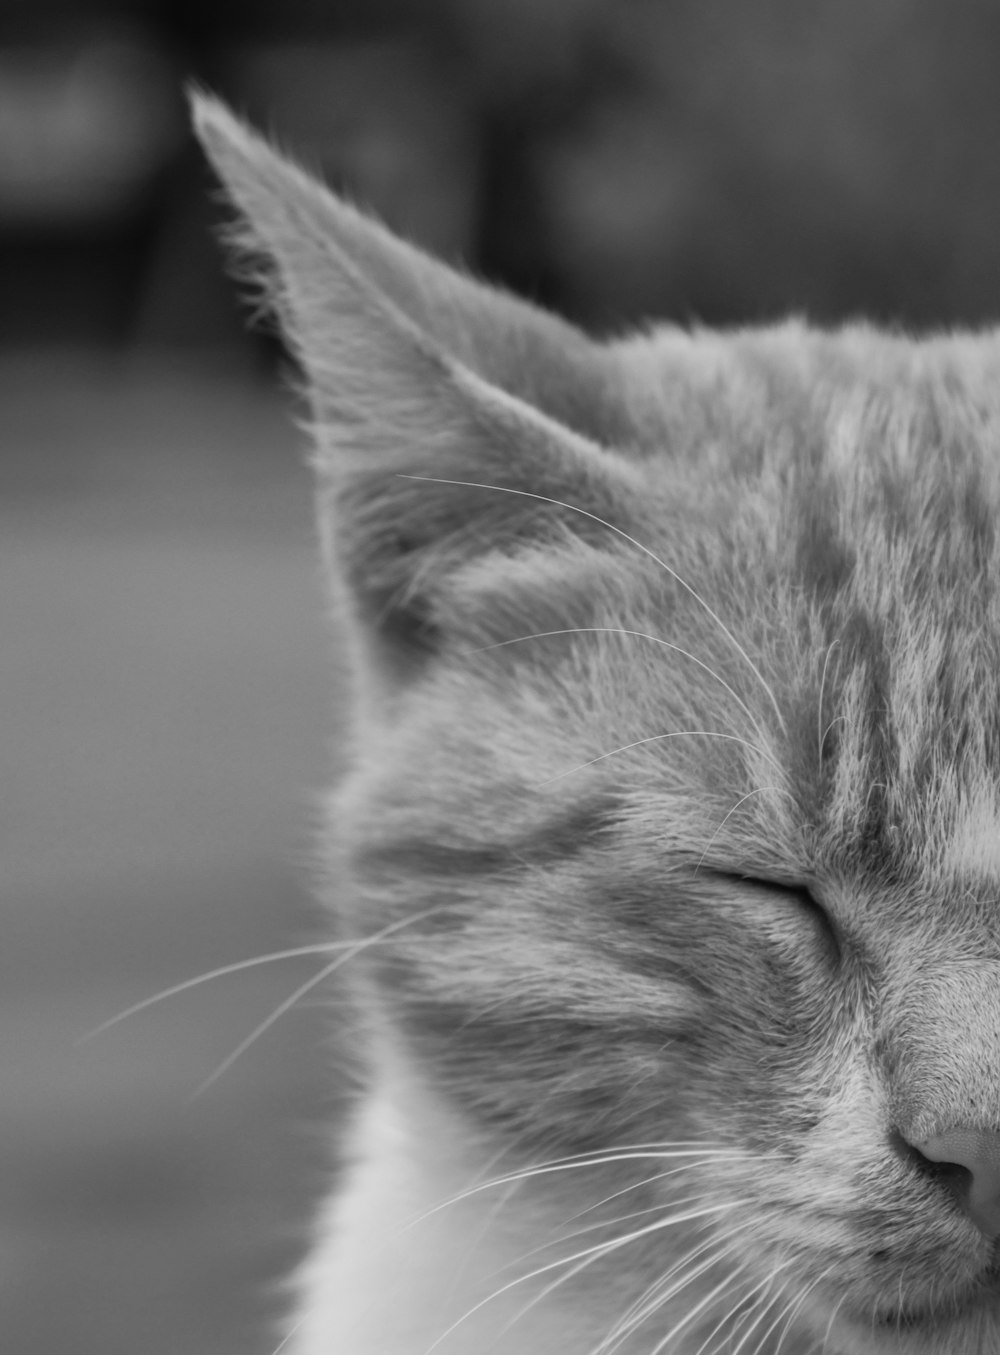 grayscale photo of tabby cat